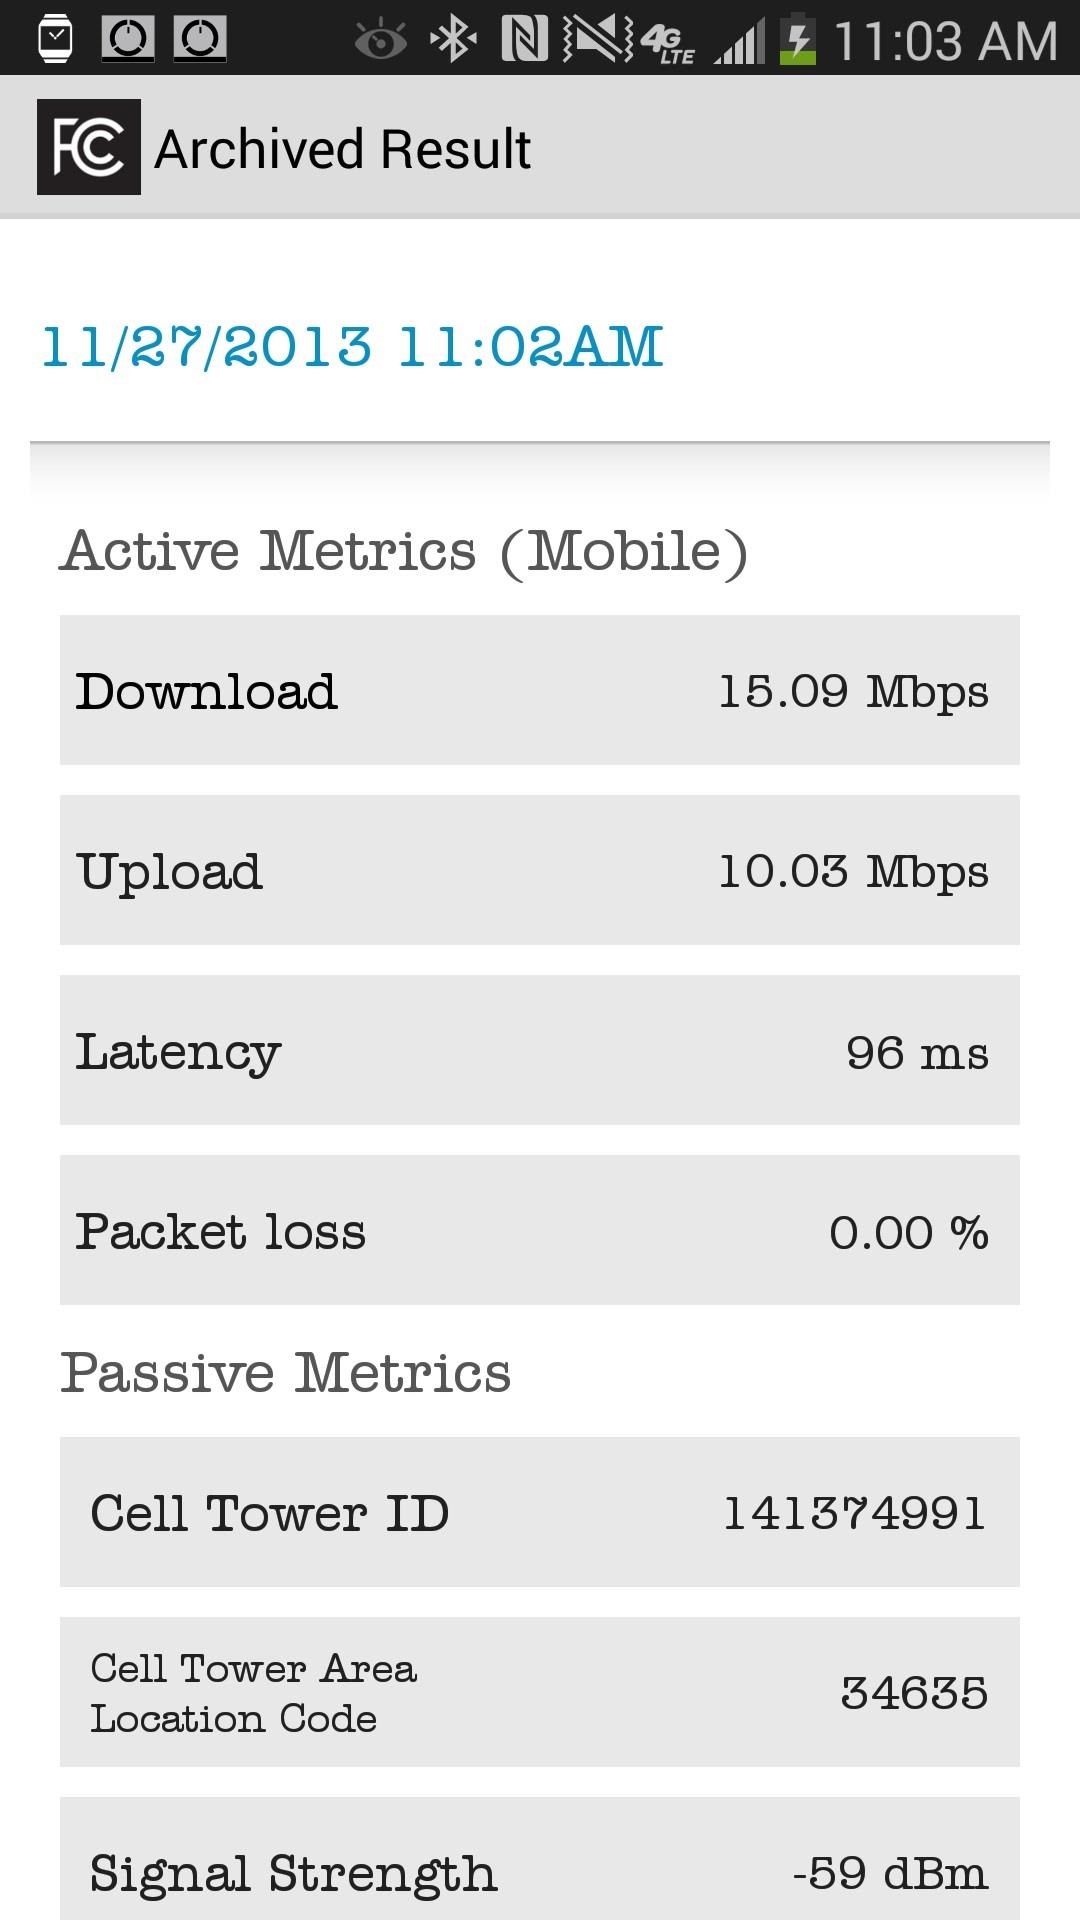 How to Measure Mobile Data & Wi-Fi Speeds on Your Samsung Galaxy Note 2 or Note 3